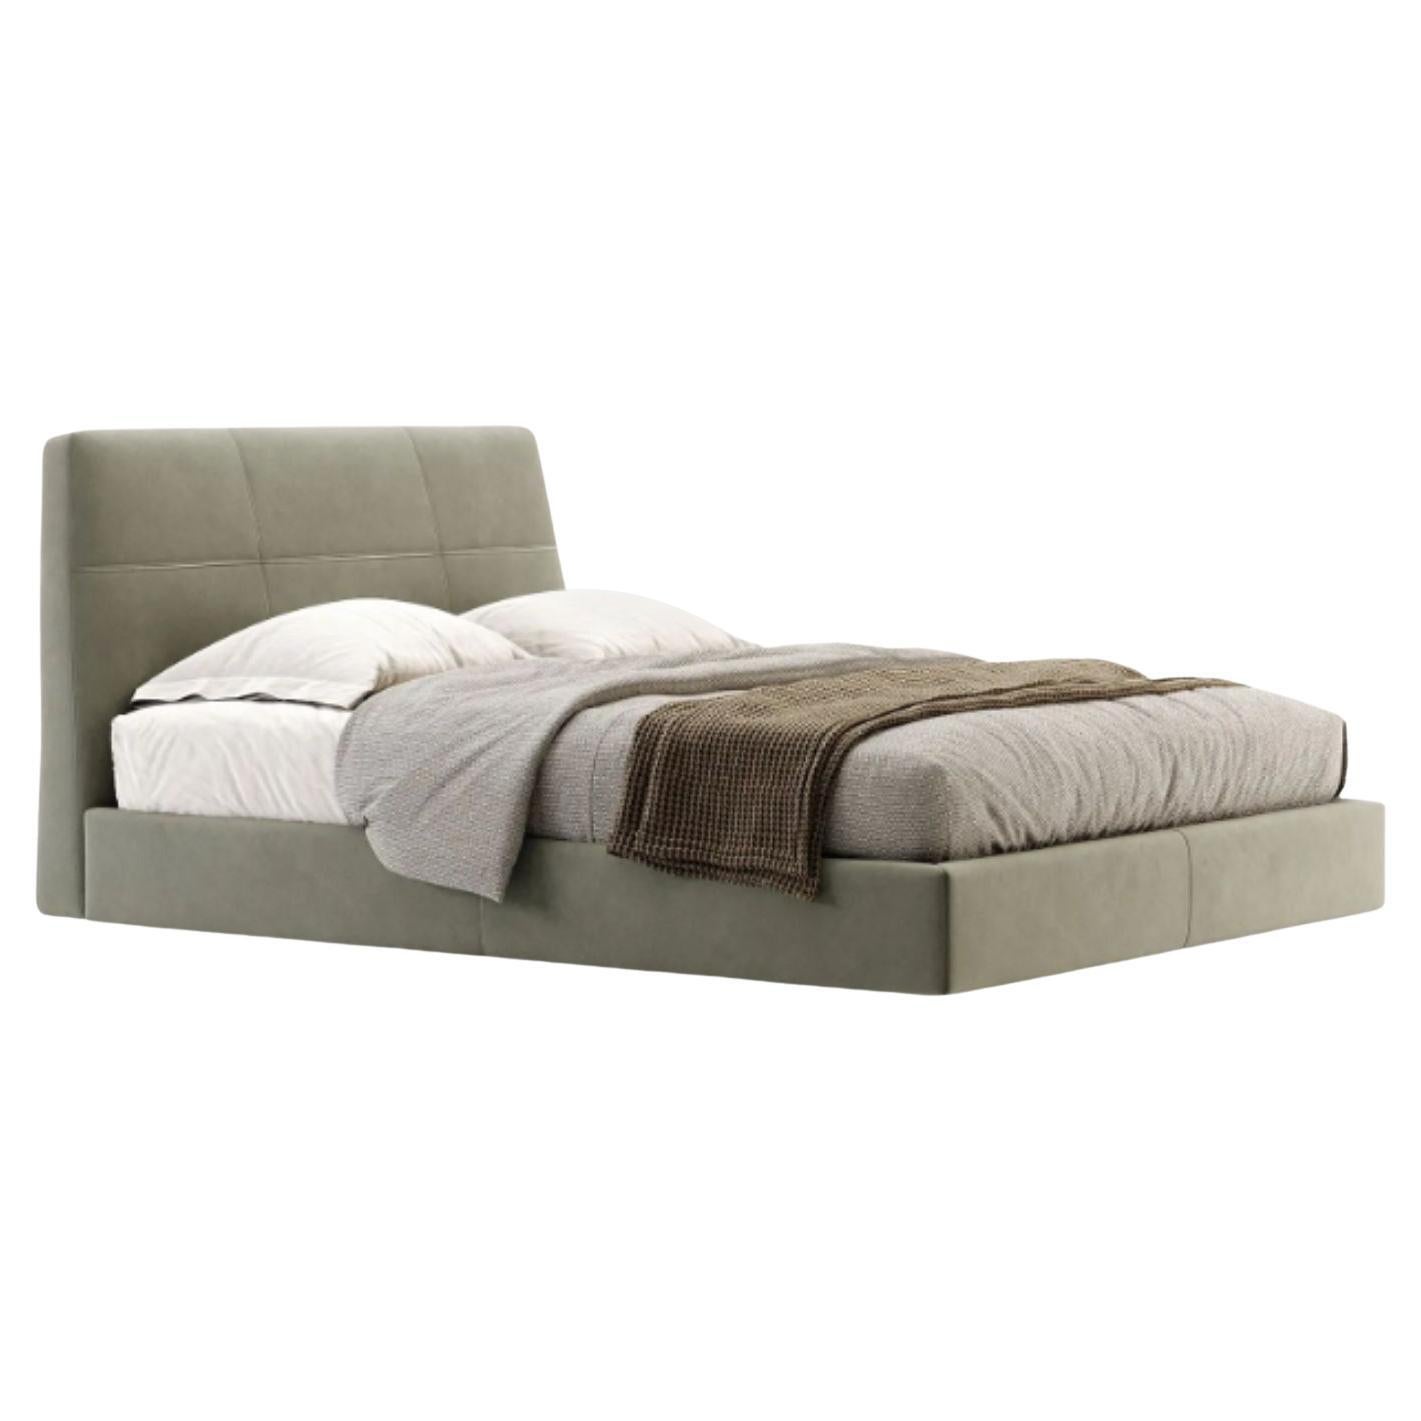 Queen Size Shelby Bed by Domkapa